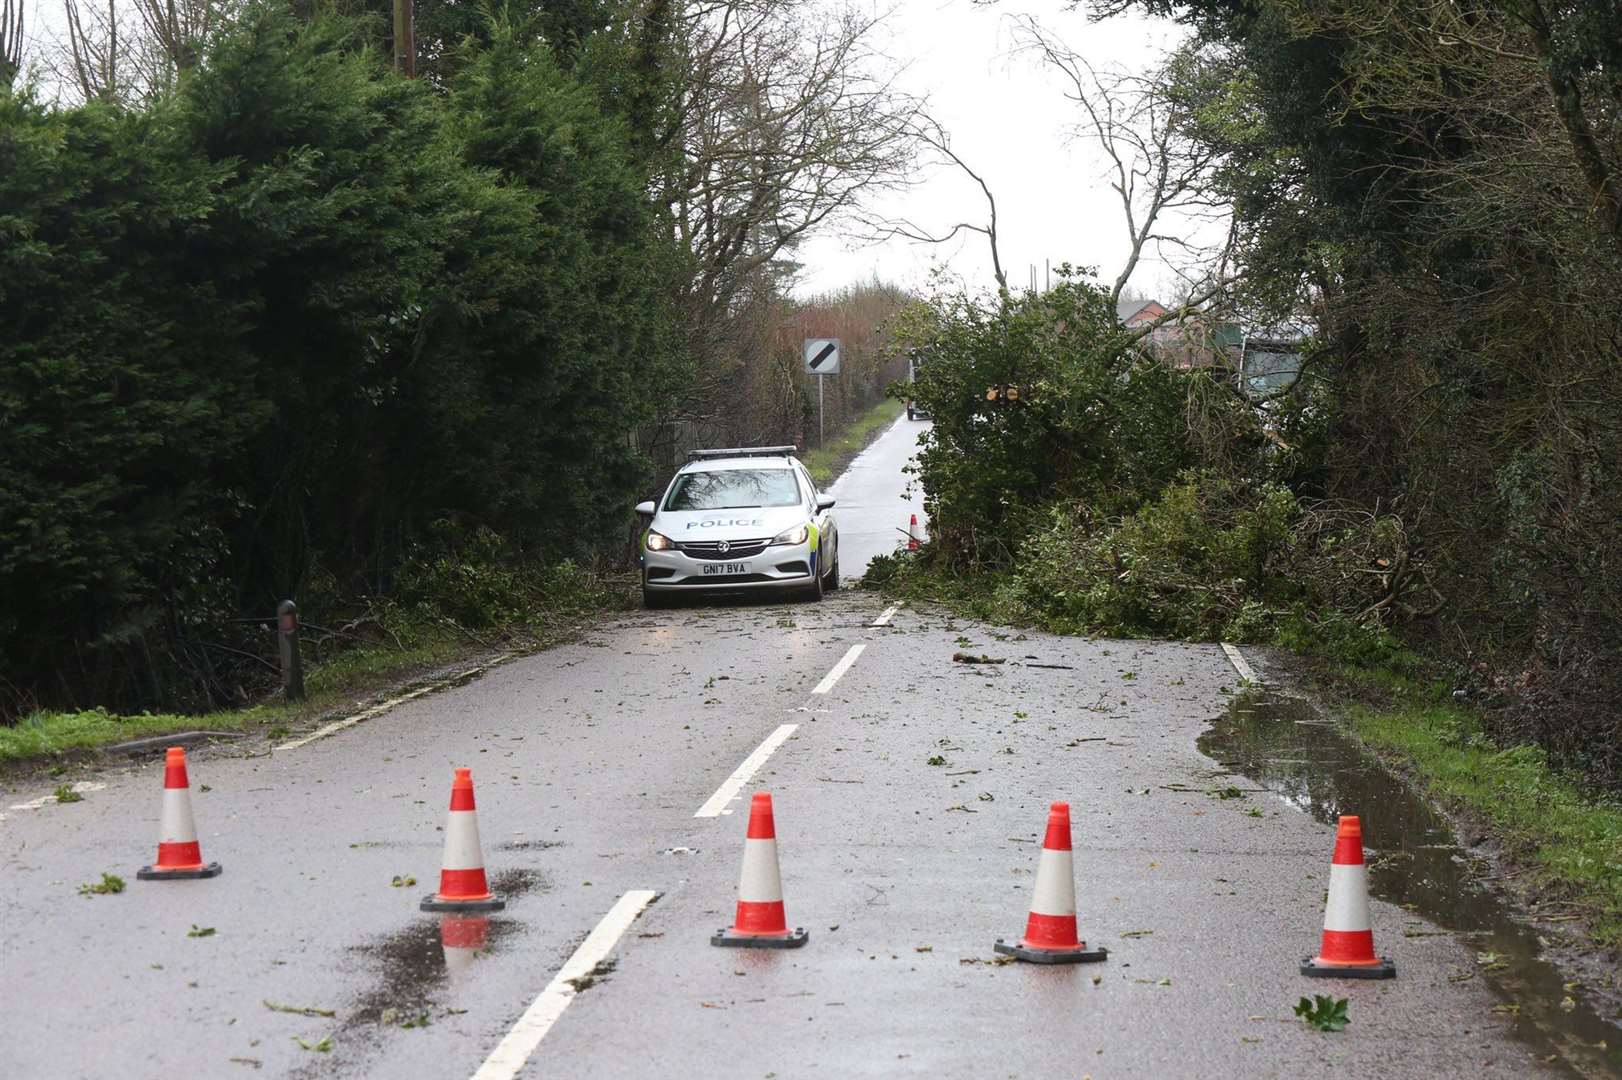 Extra tree surgeons are on-call for tomorrow's storm